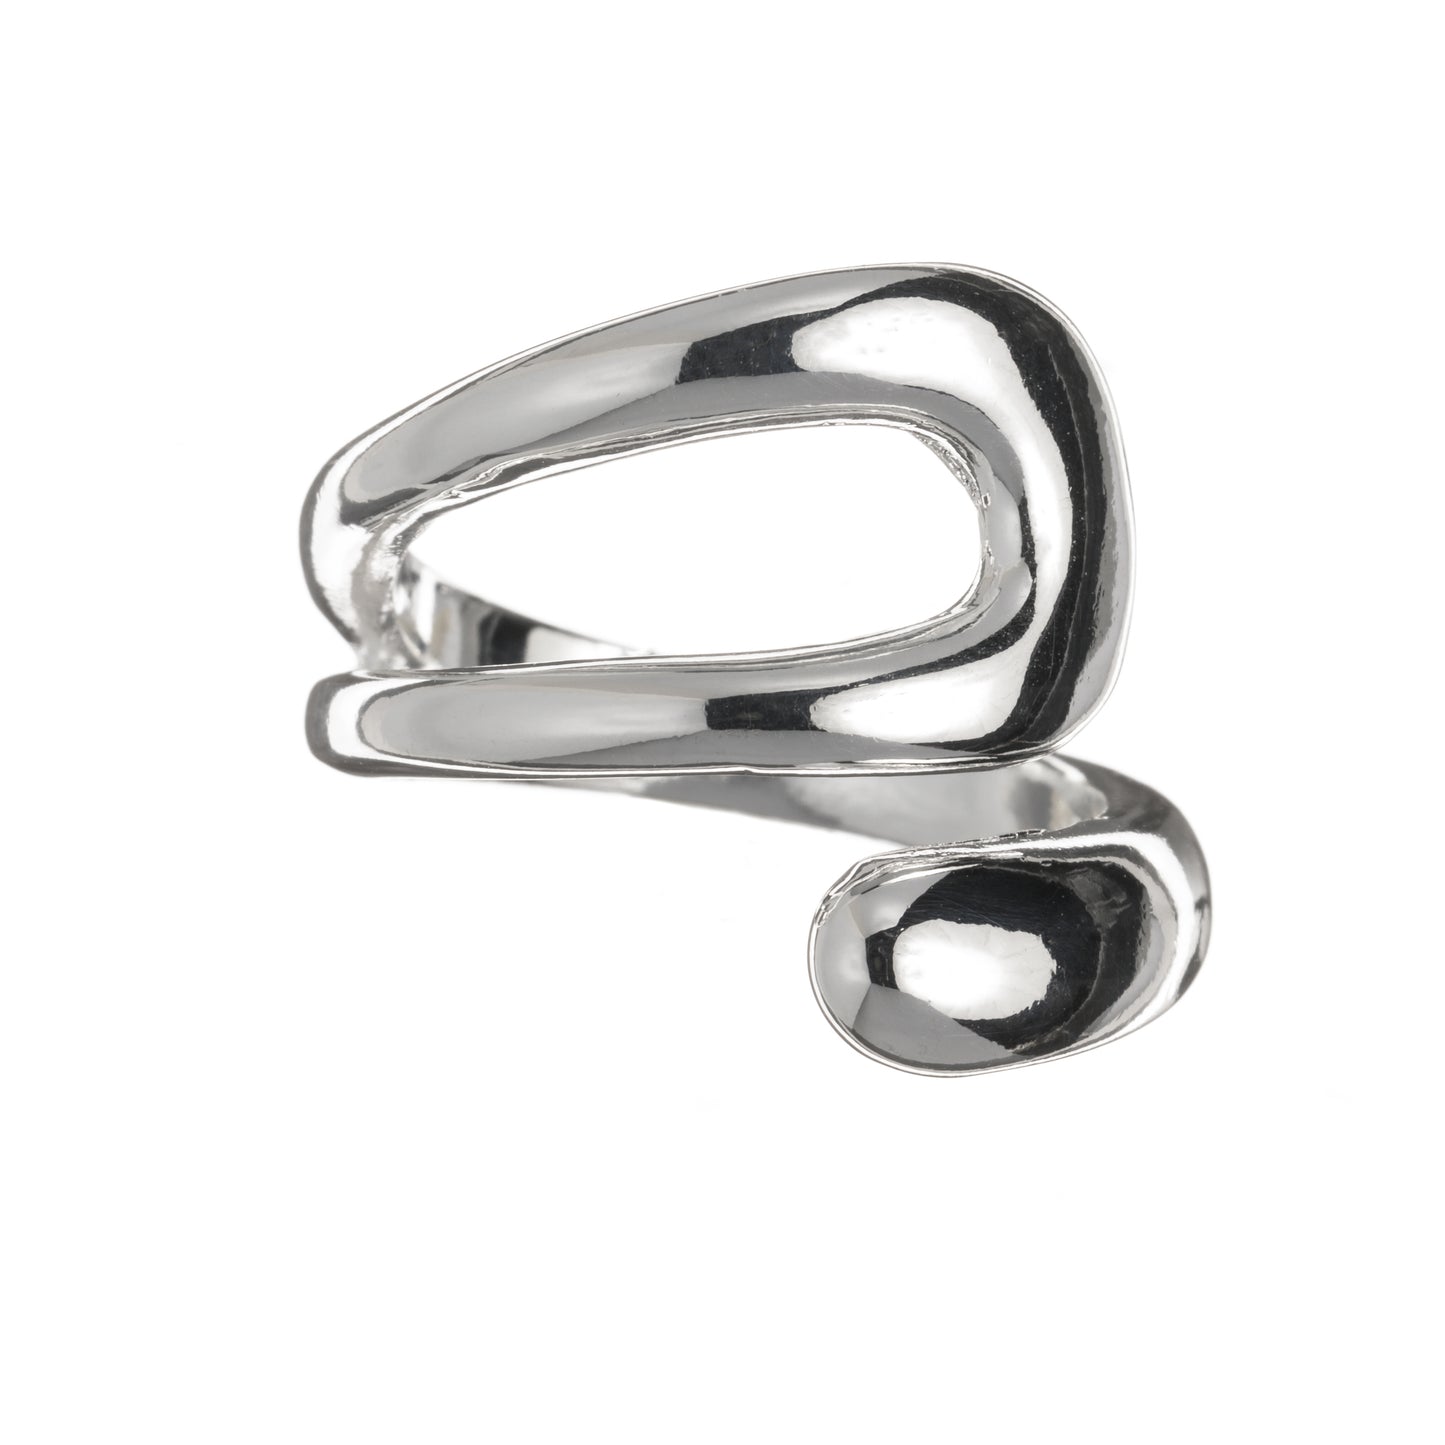 Sphere to Clip Ring